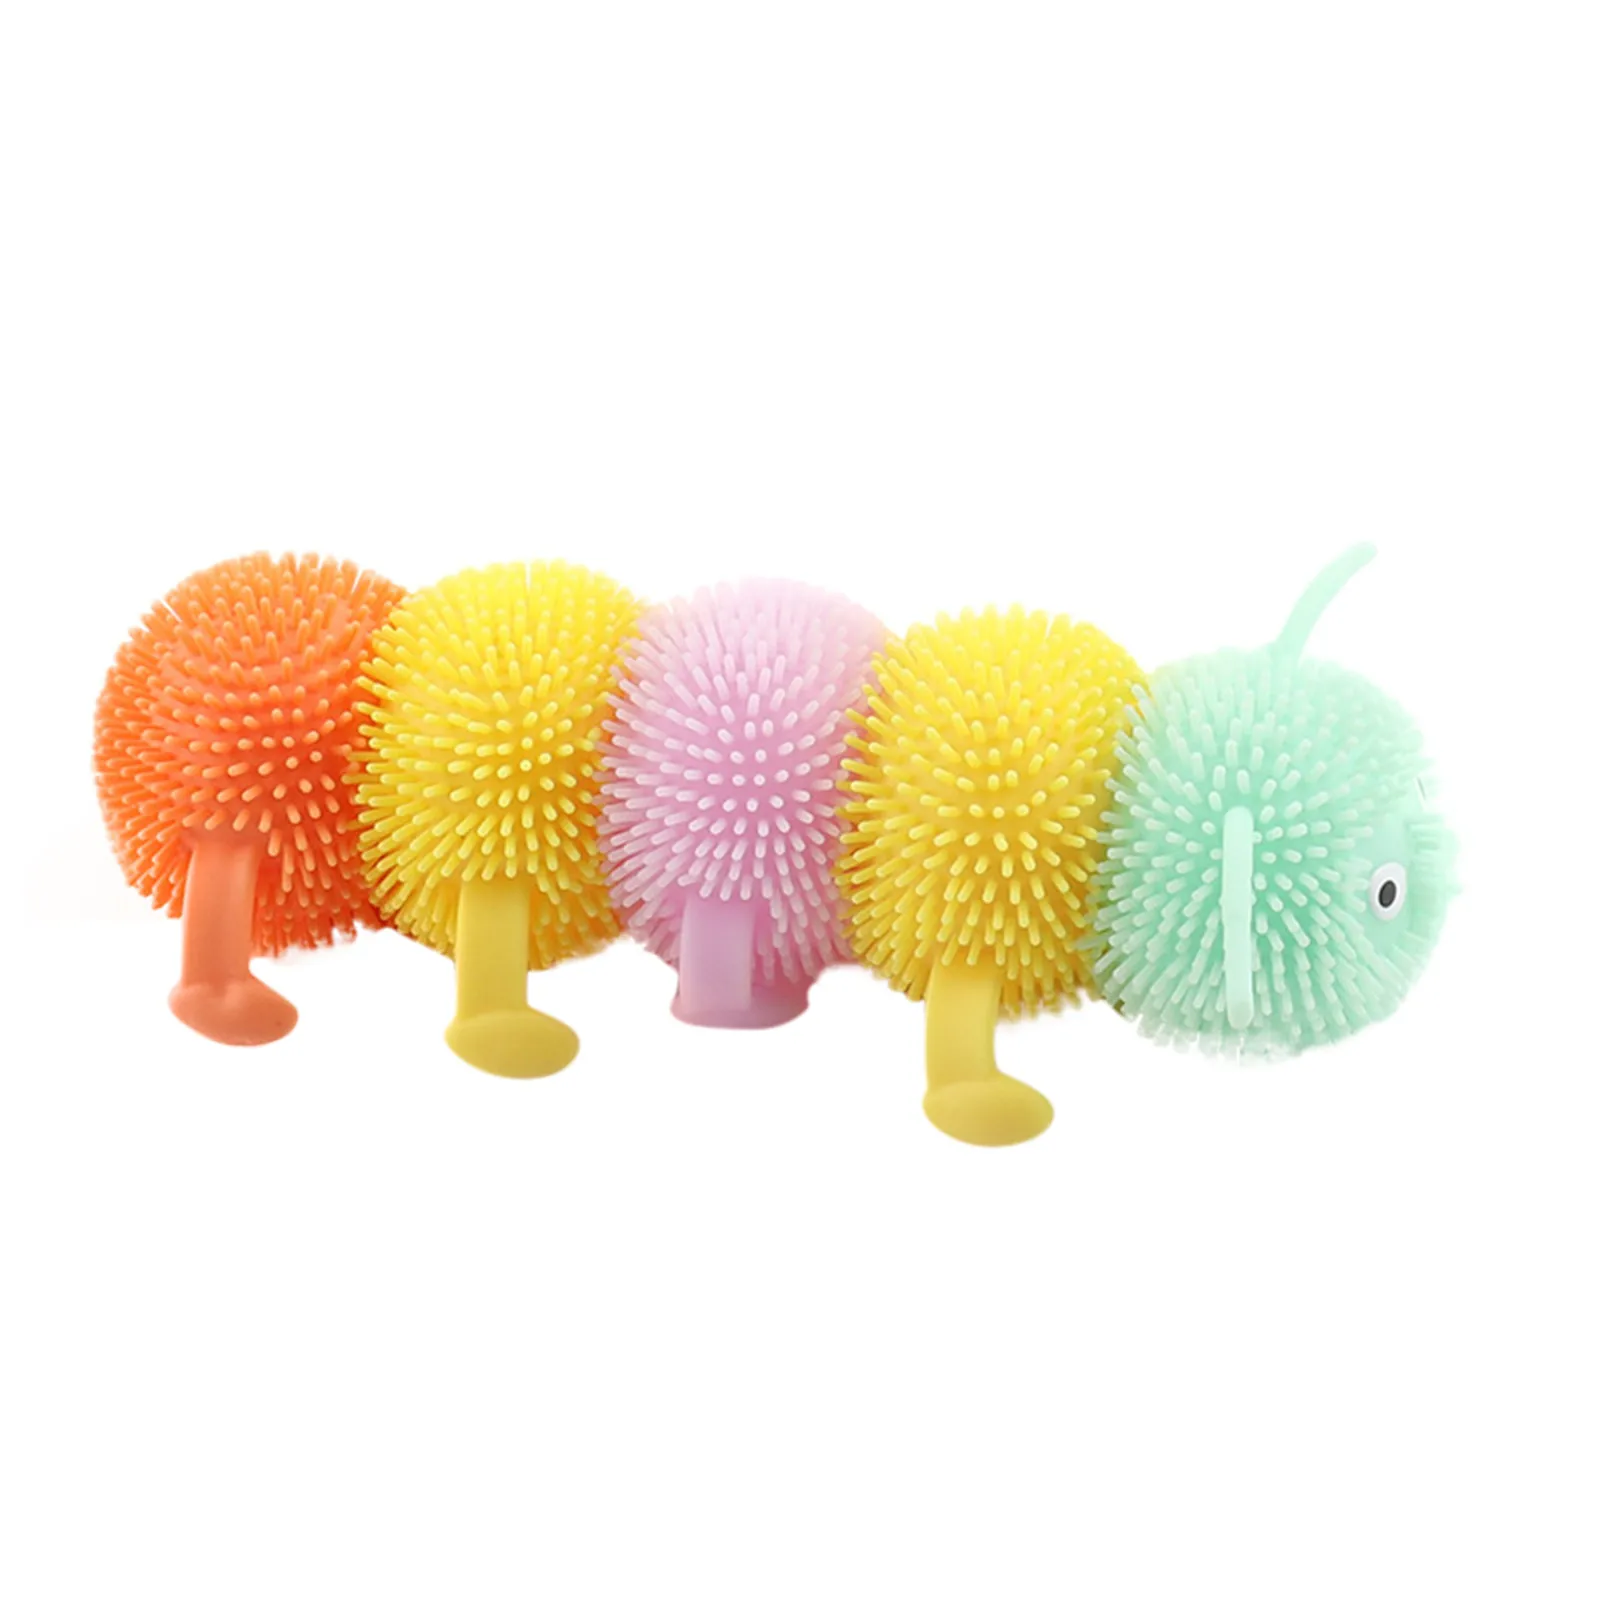 16 Knots Caterpillar Relieves Stress Toy Physiotherapy Releases Stress,to Relieve Pressure Suitable for Children Over 3 Years Old to Play can Fall can Squeeze Relieve Pressure Pink 